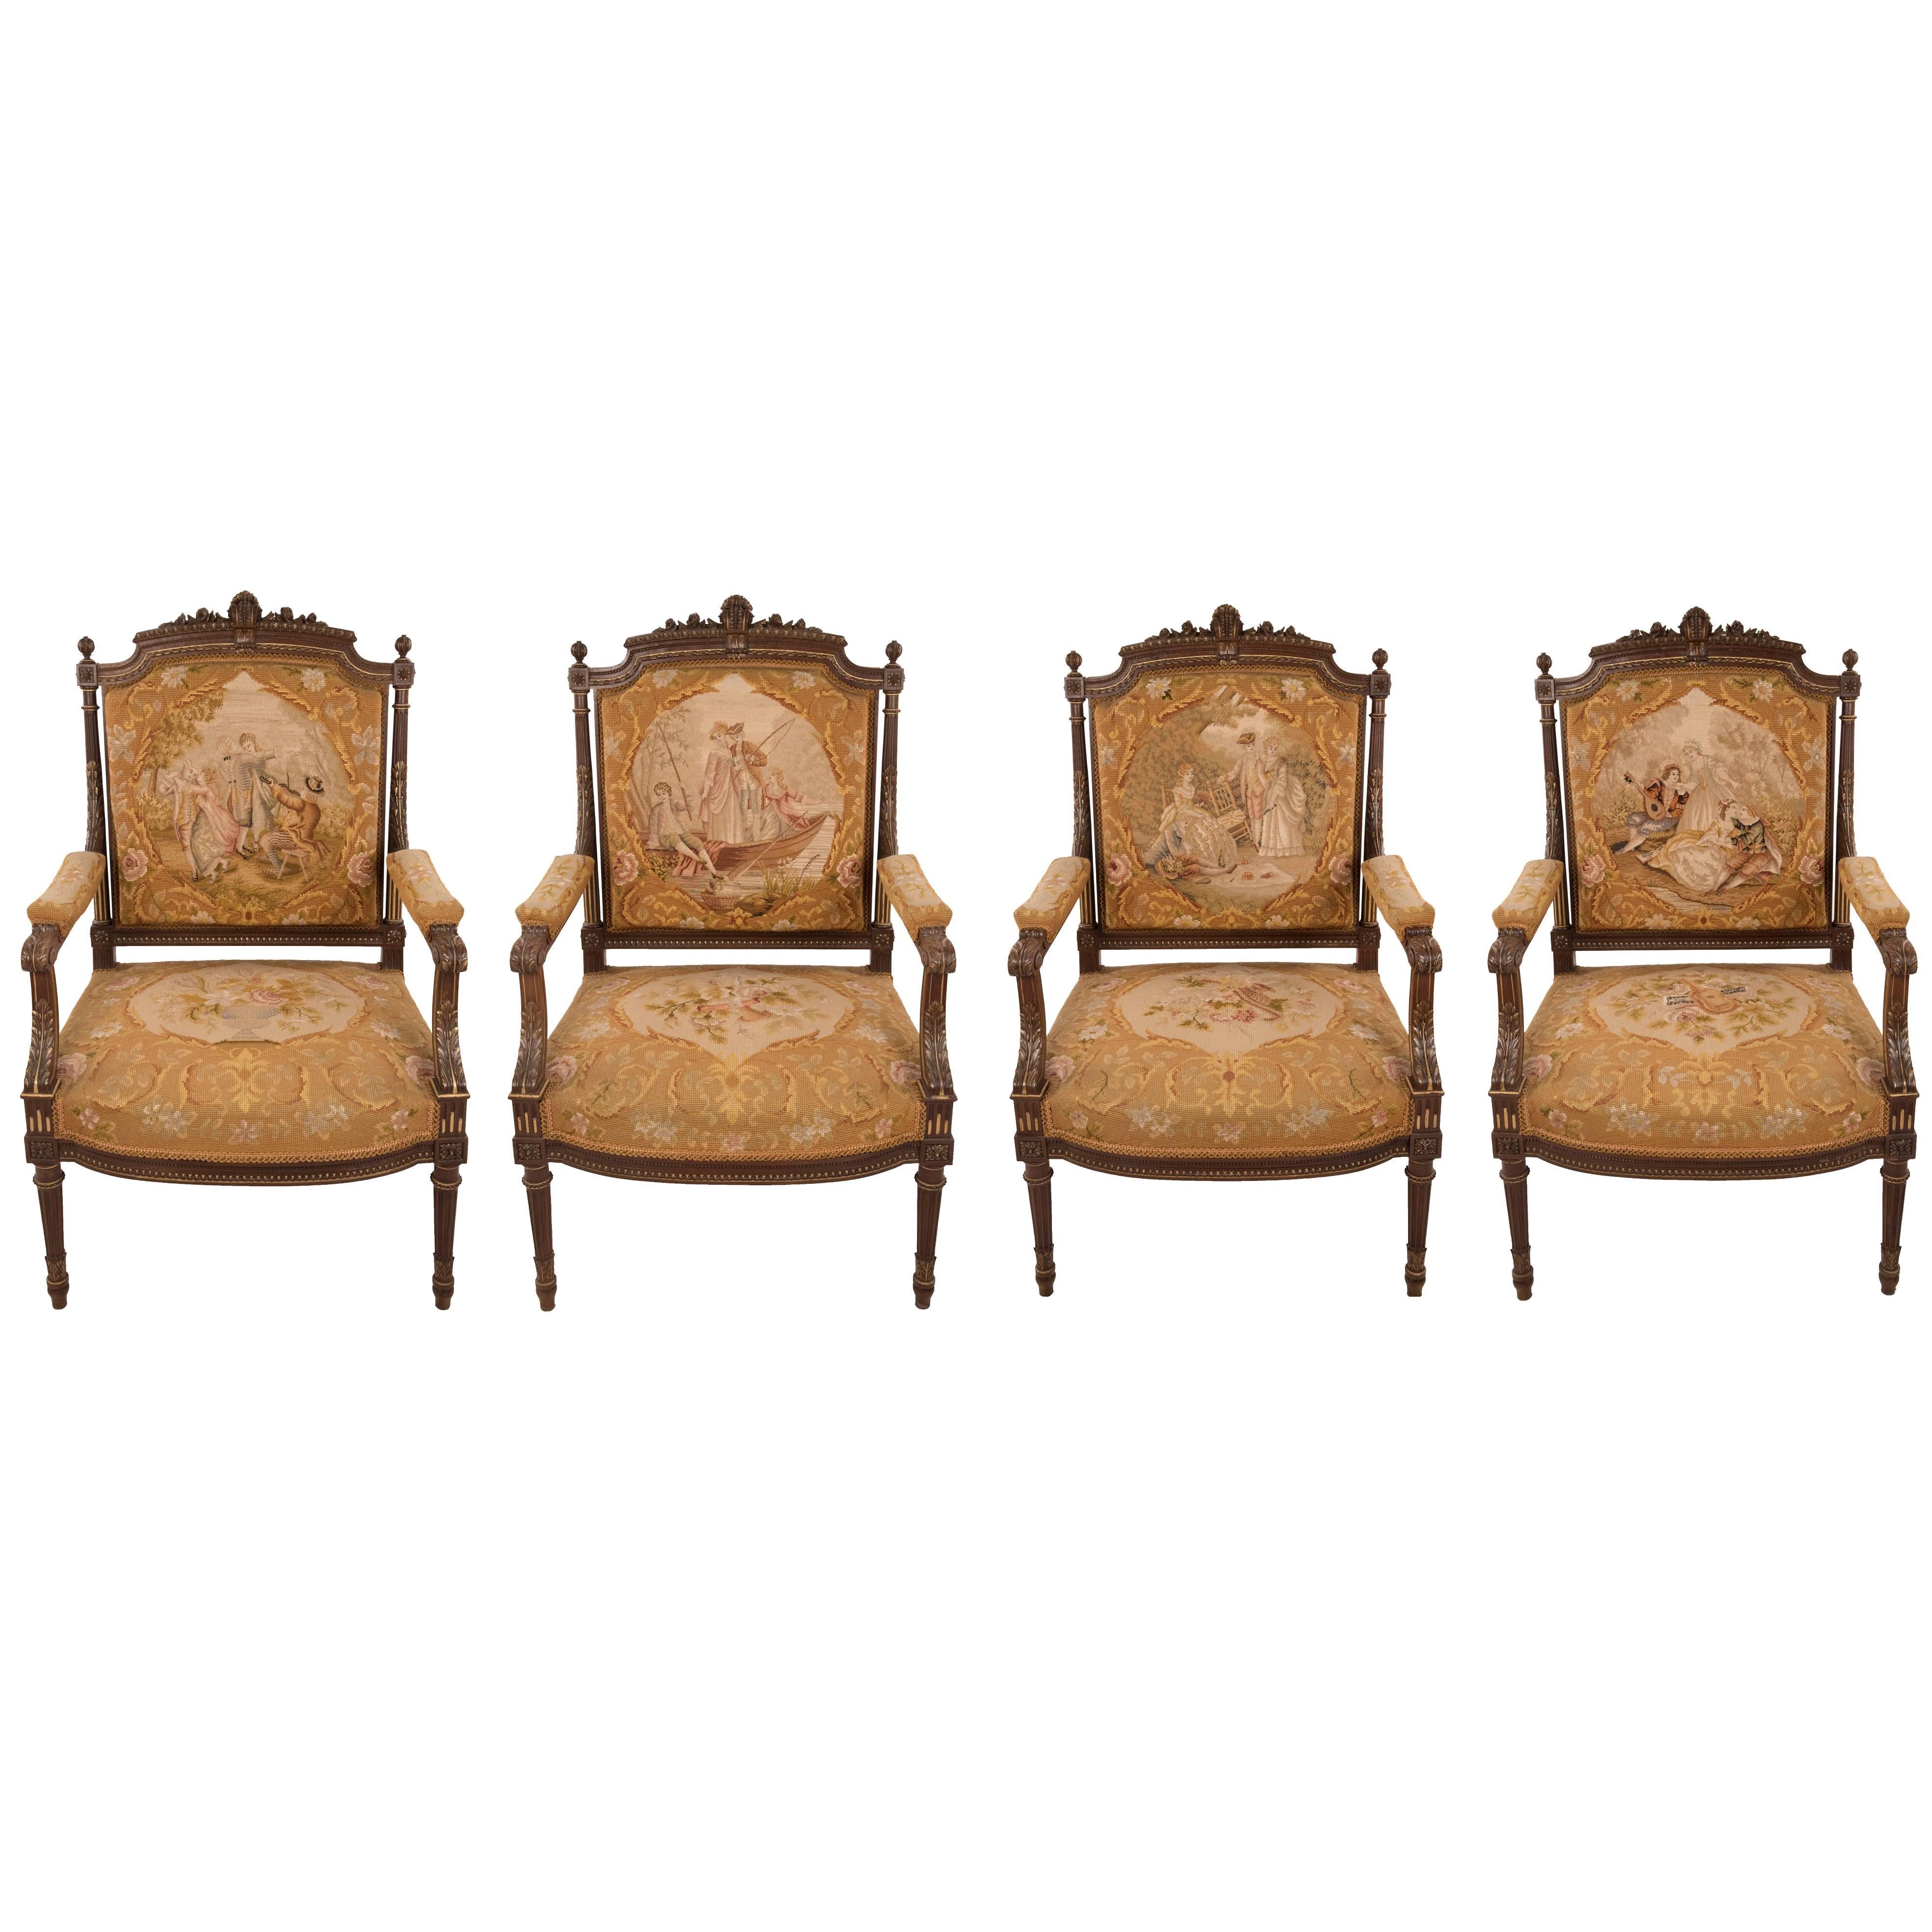 Set of Louis XVI Style Walnut and Parcel-Gilt Needlepoint-Upholstered Armchairs